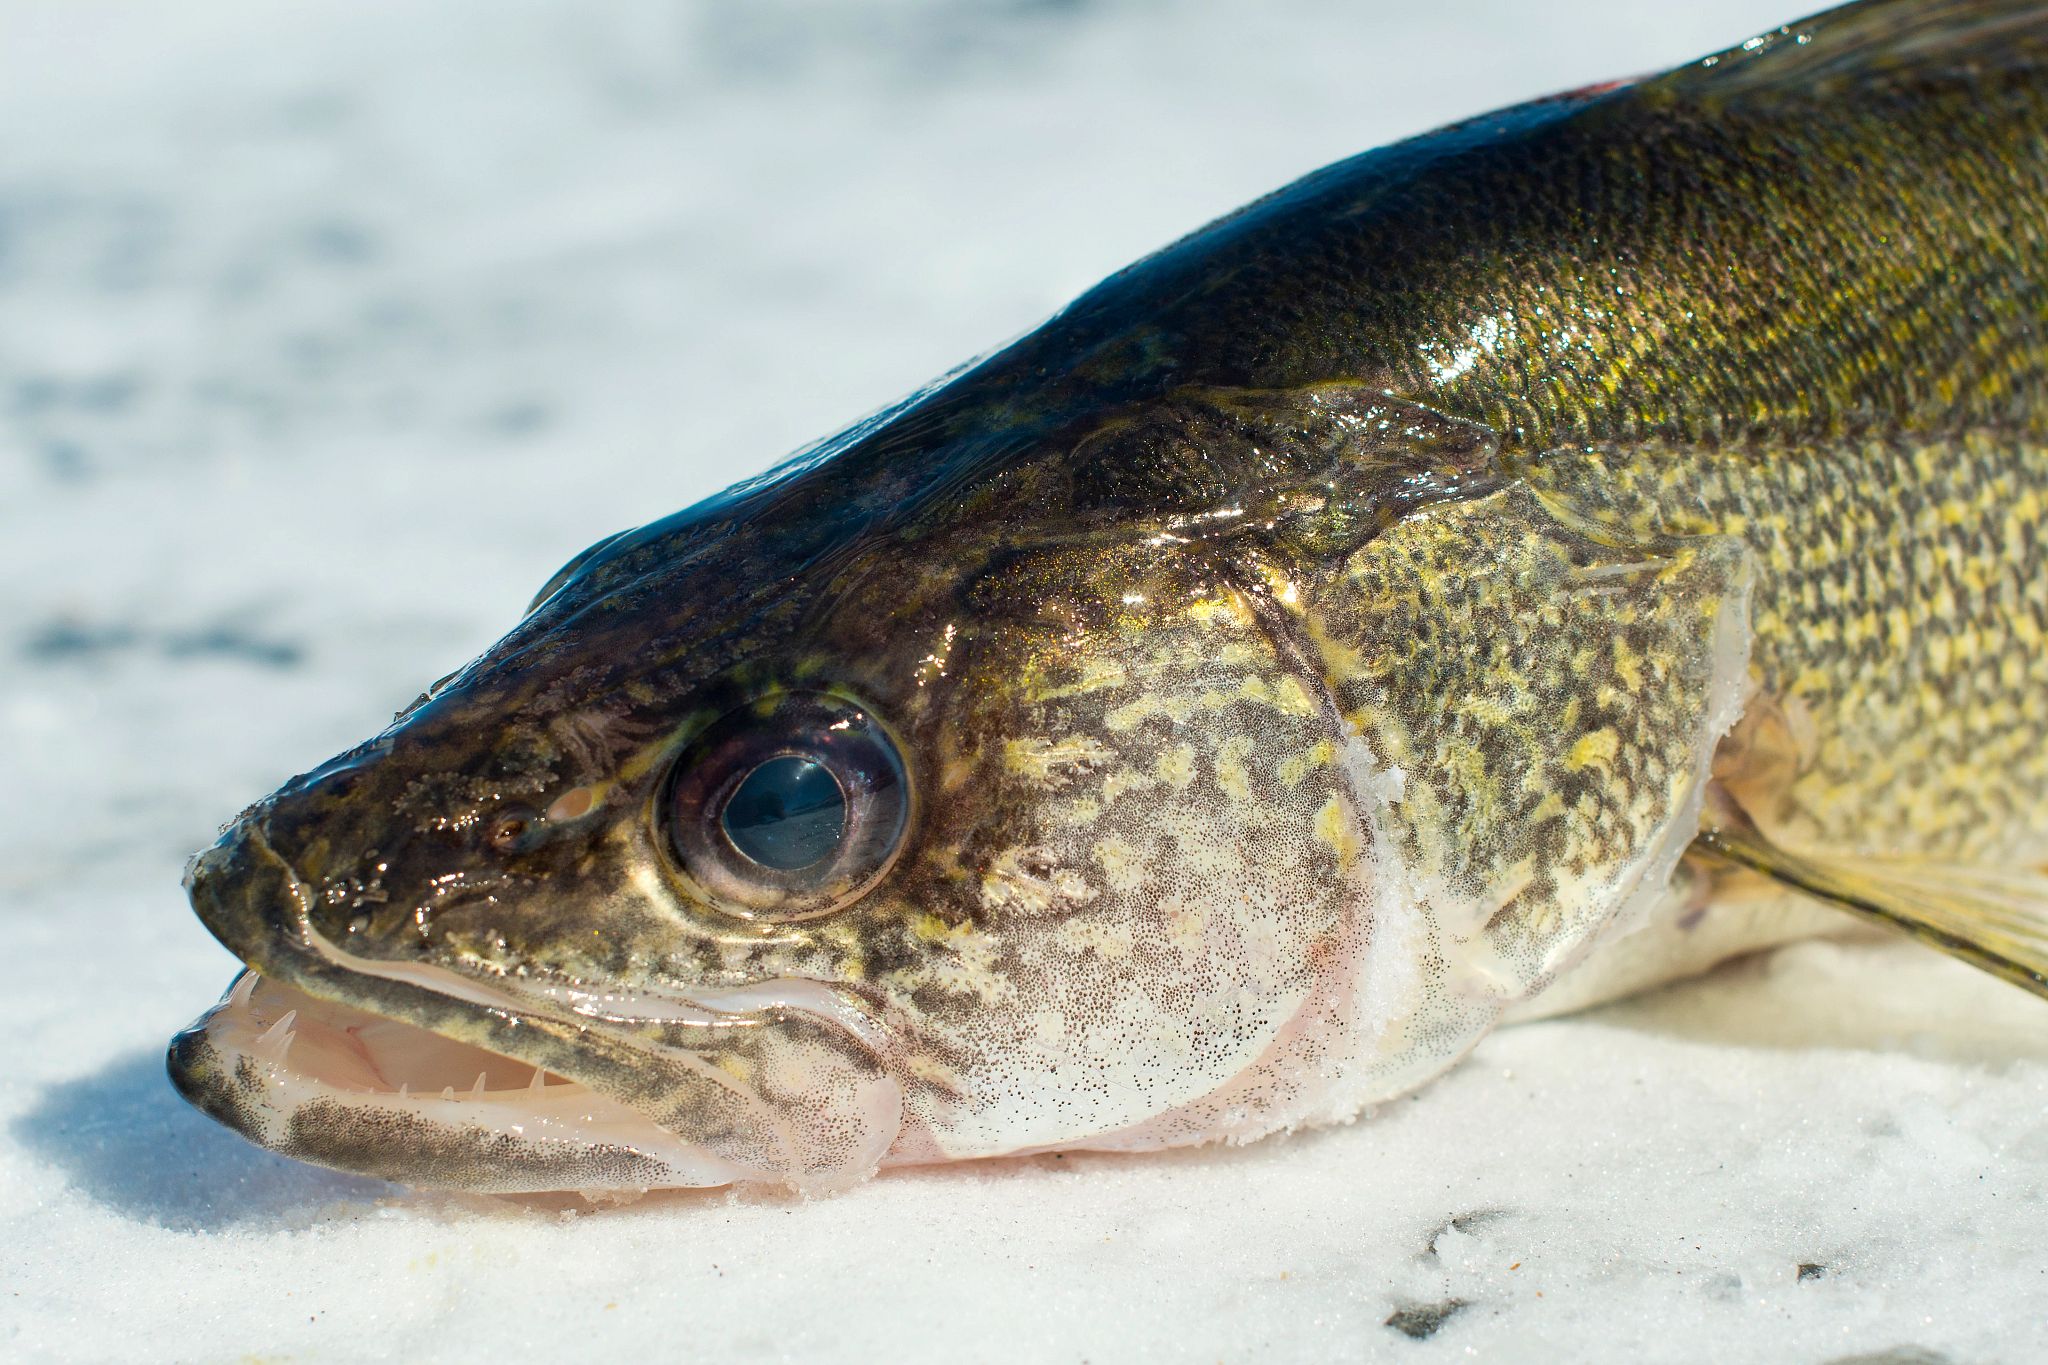 A walleye out of water, laying on ice.